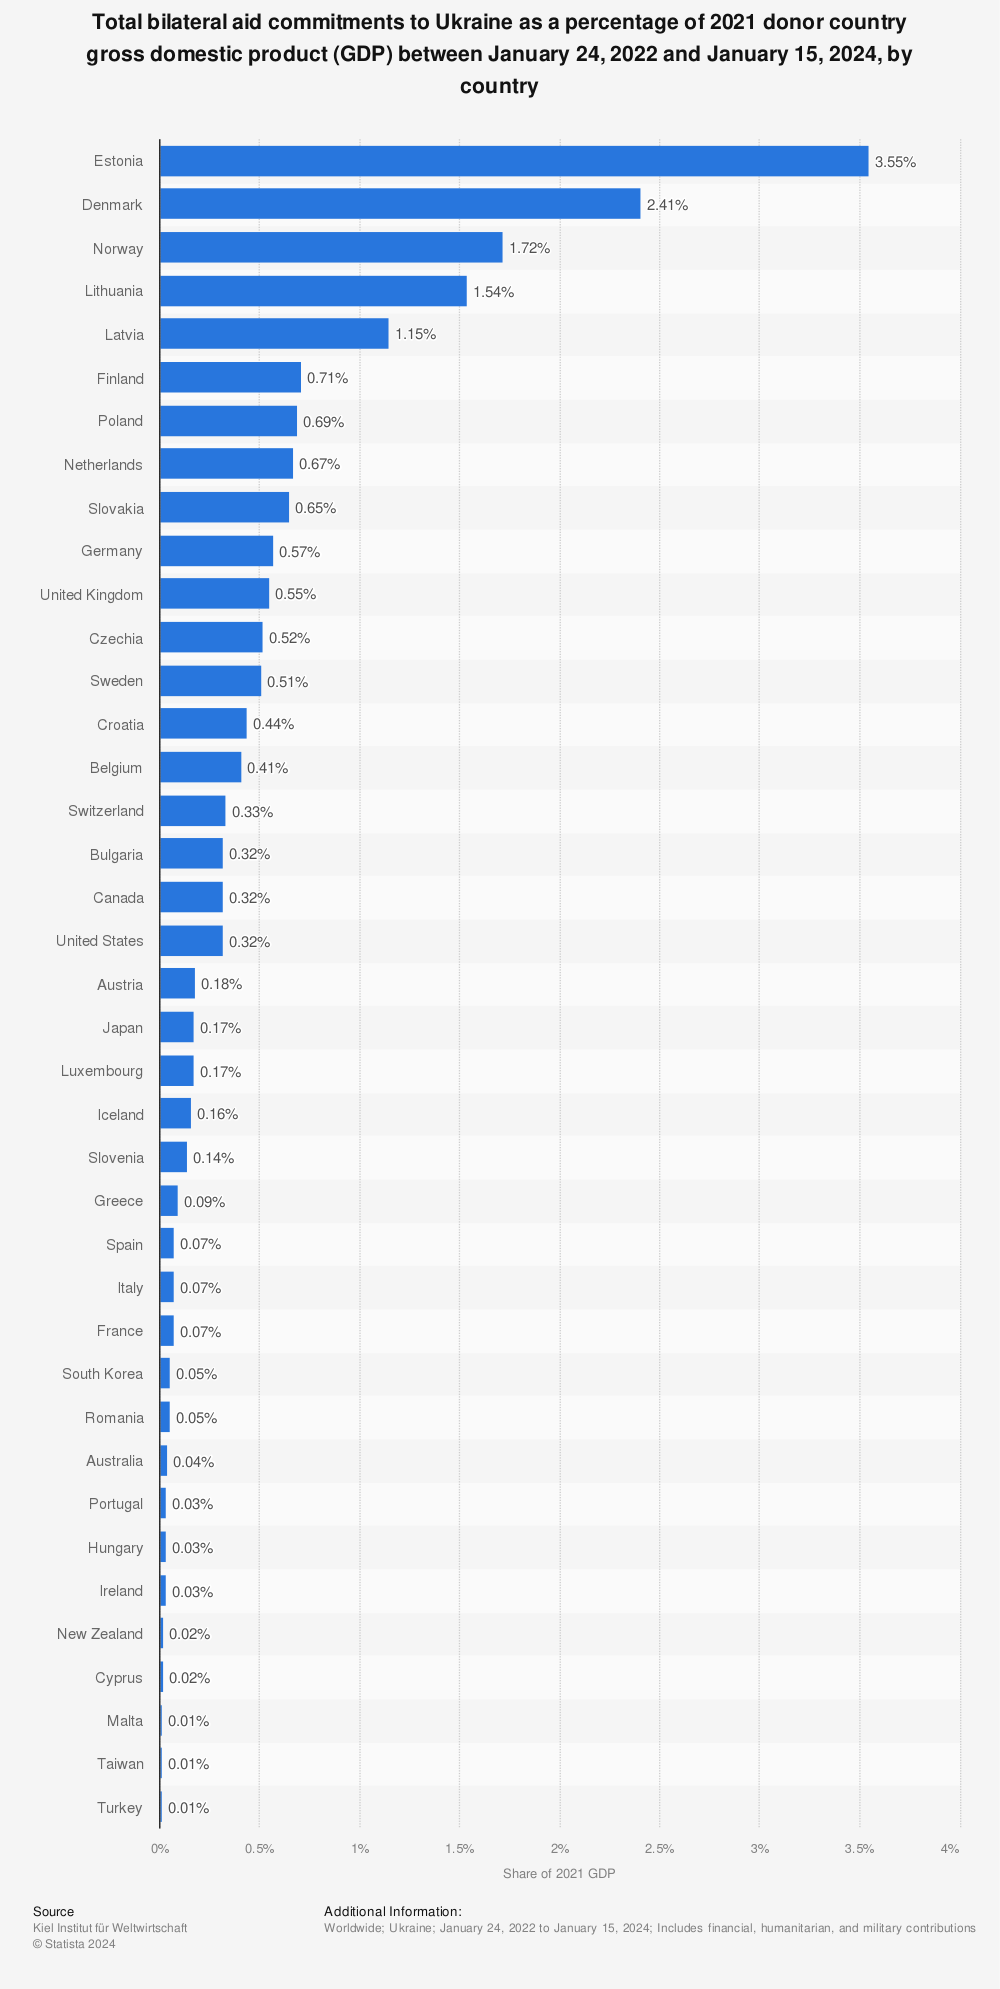 Statistic: Total bilateral aid commitments to Ukraine as a percentage of donor gross domestic product (GDP) between January 24, 2022 and February 24, 2023, by country | Statista